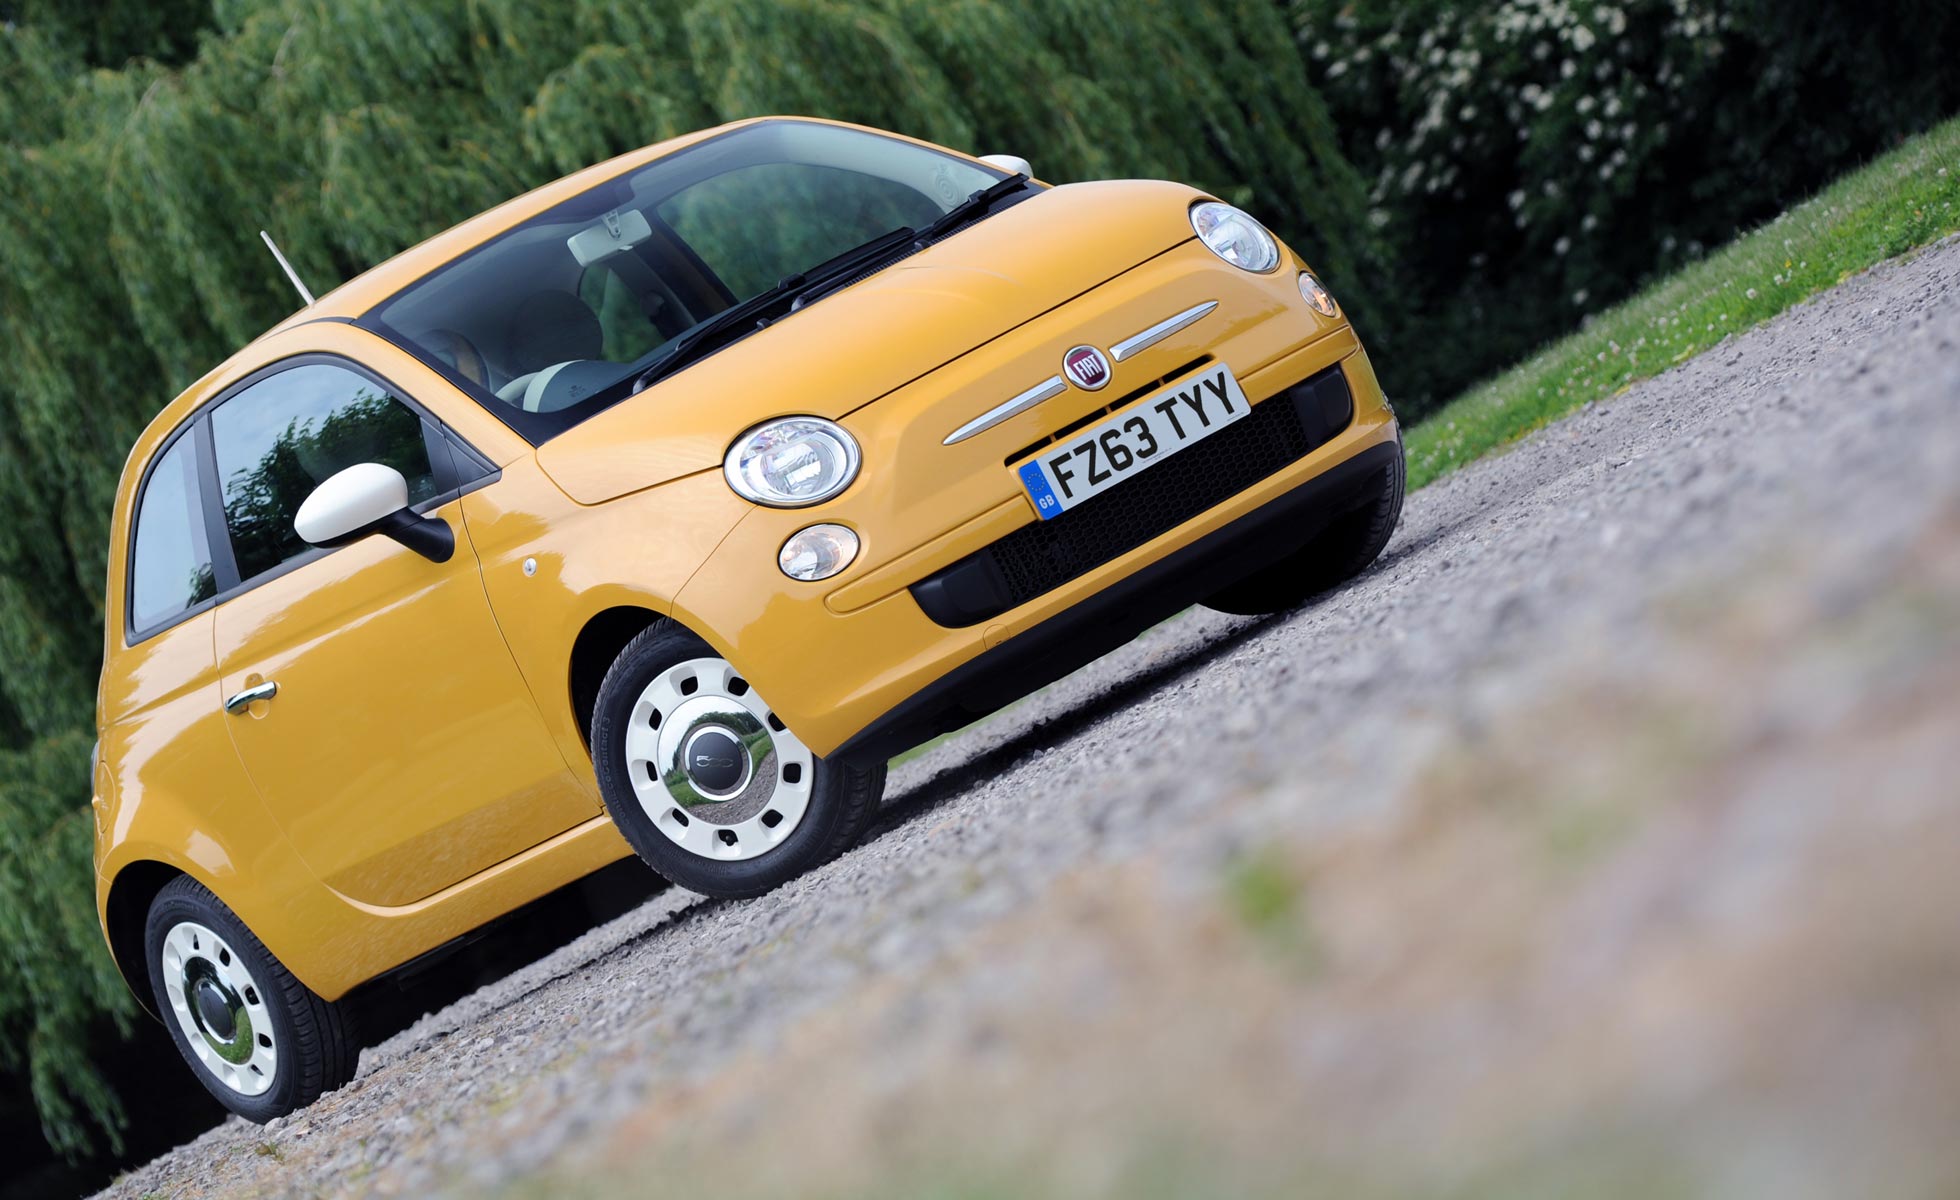 Fiat 500 not powerful enough for hills says BBC's Watchdog - Motoring  Research